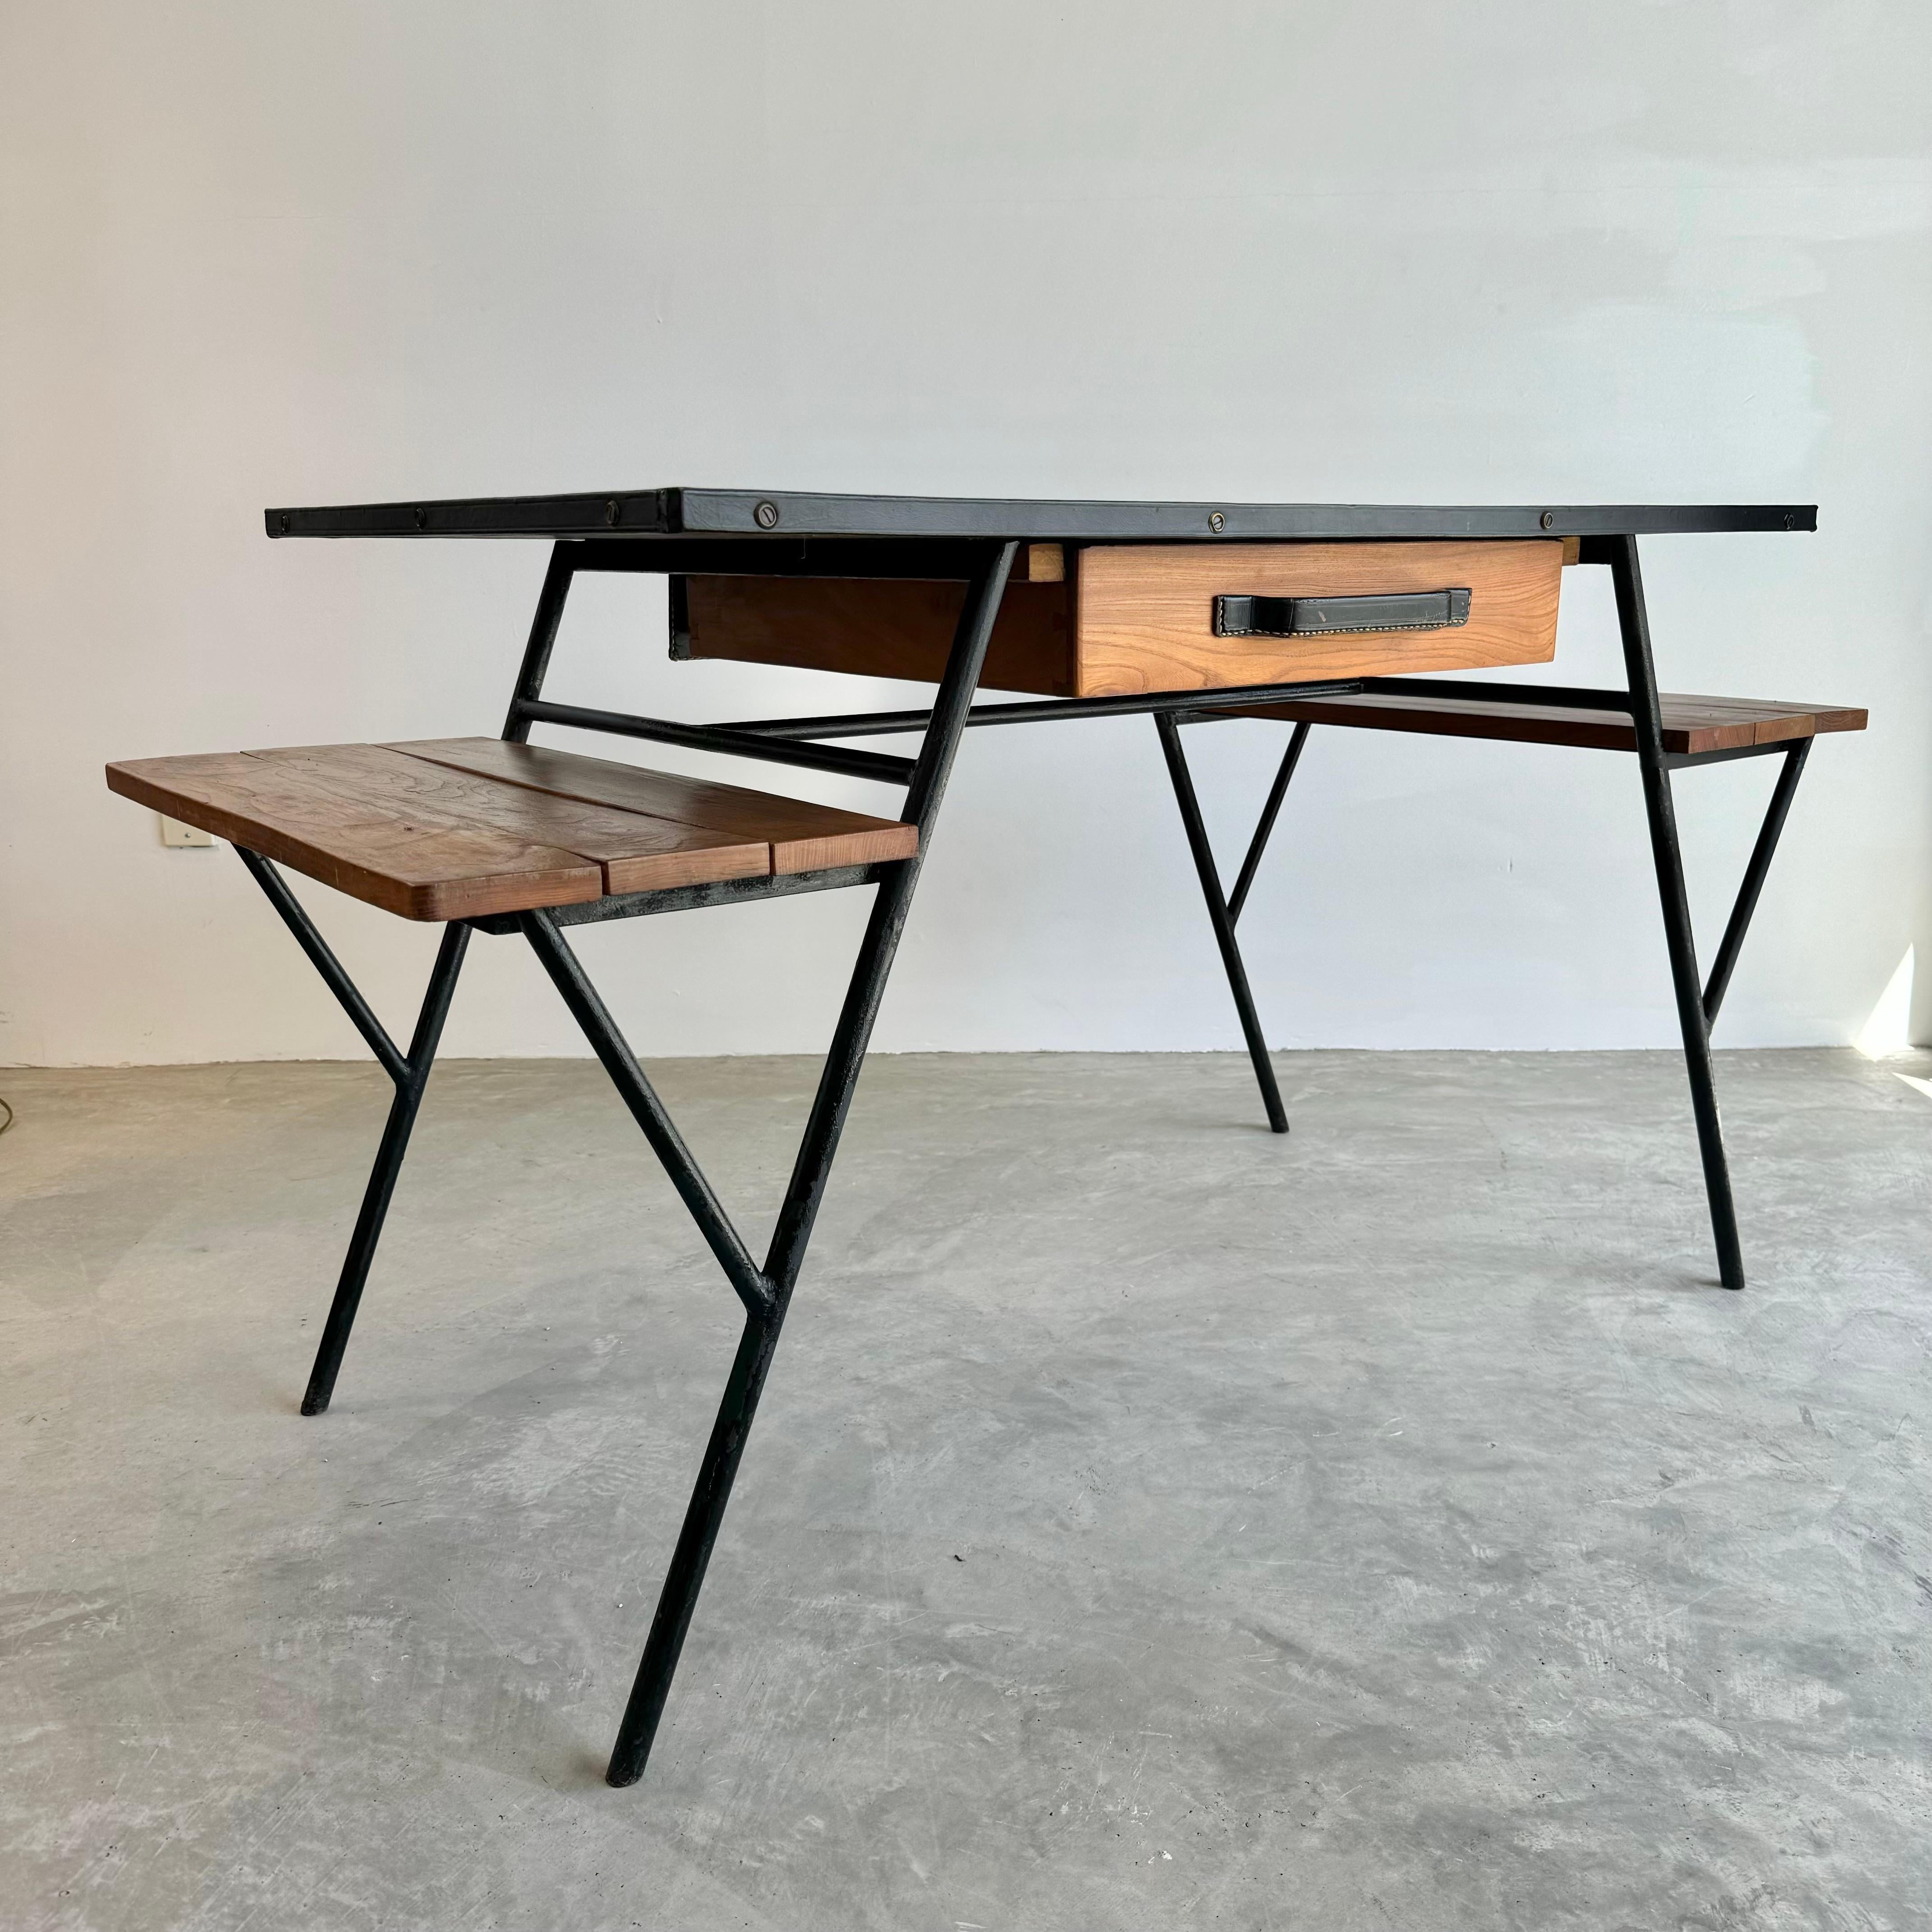 Monumental Art Deco era desk by French Modernist designer Jacques Adnet. Black iron 'A' frame with 4 angled iron legs. Solid oak table top wrapped in black leather with brass studs provides an ample writing surface. Smaller shelves made of walnut